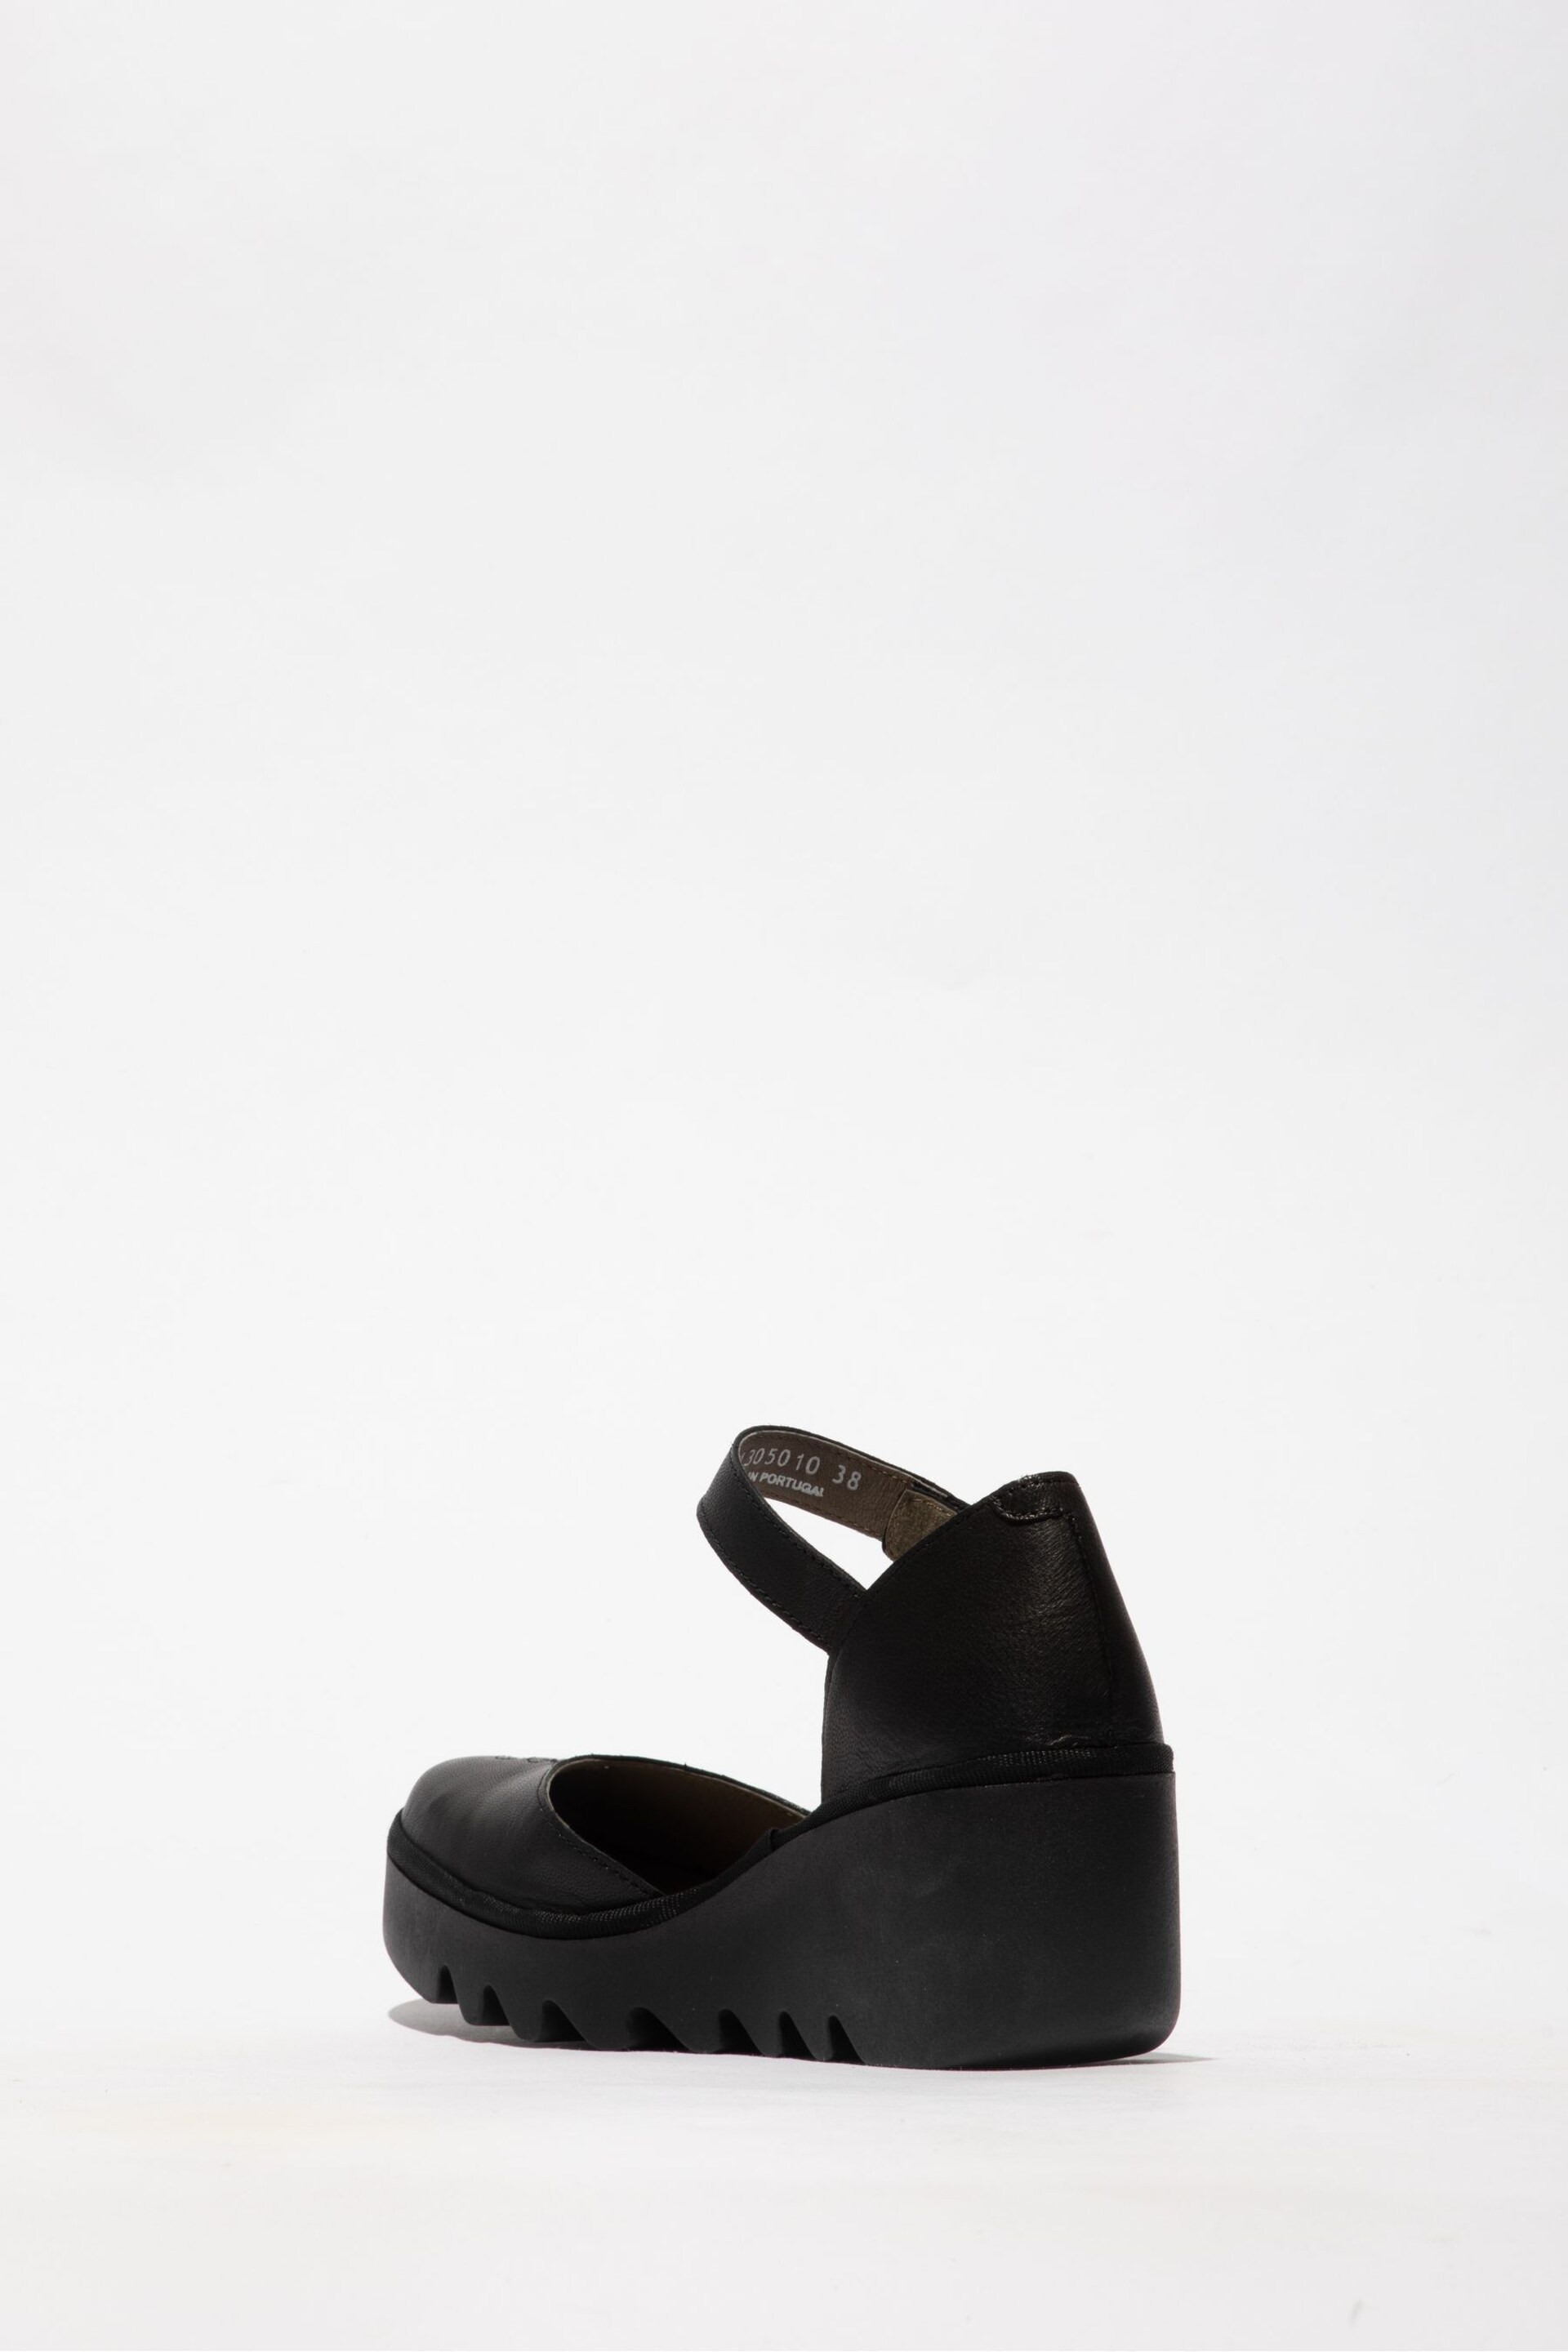 Fly London Black Biso Wedge Shoes - Image 2 of 4